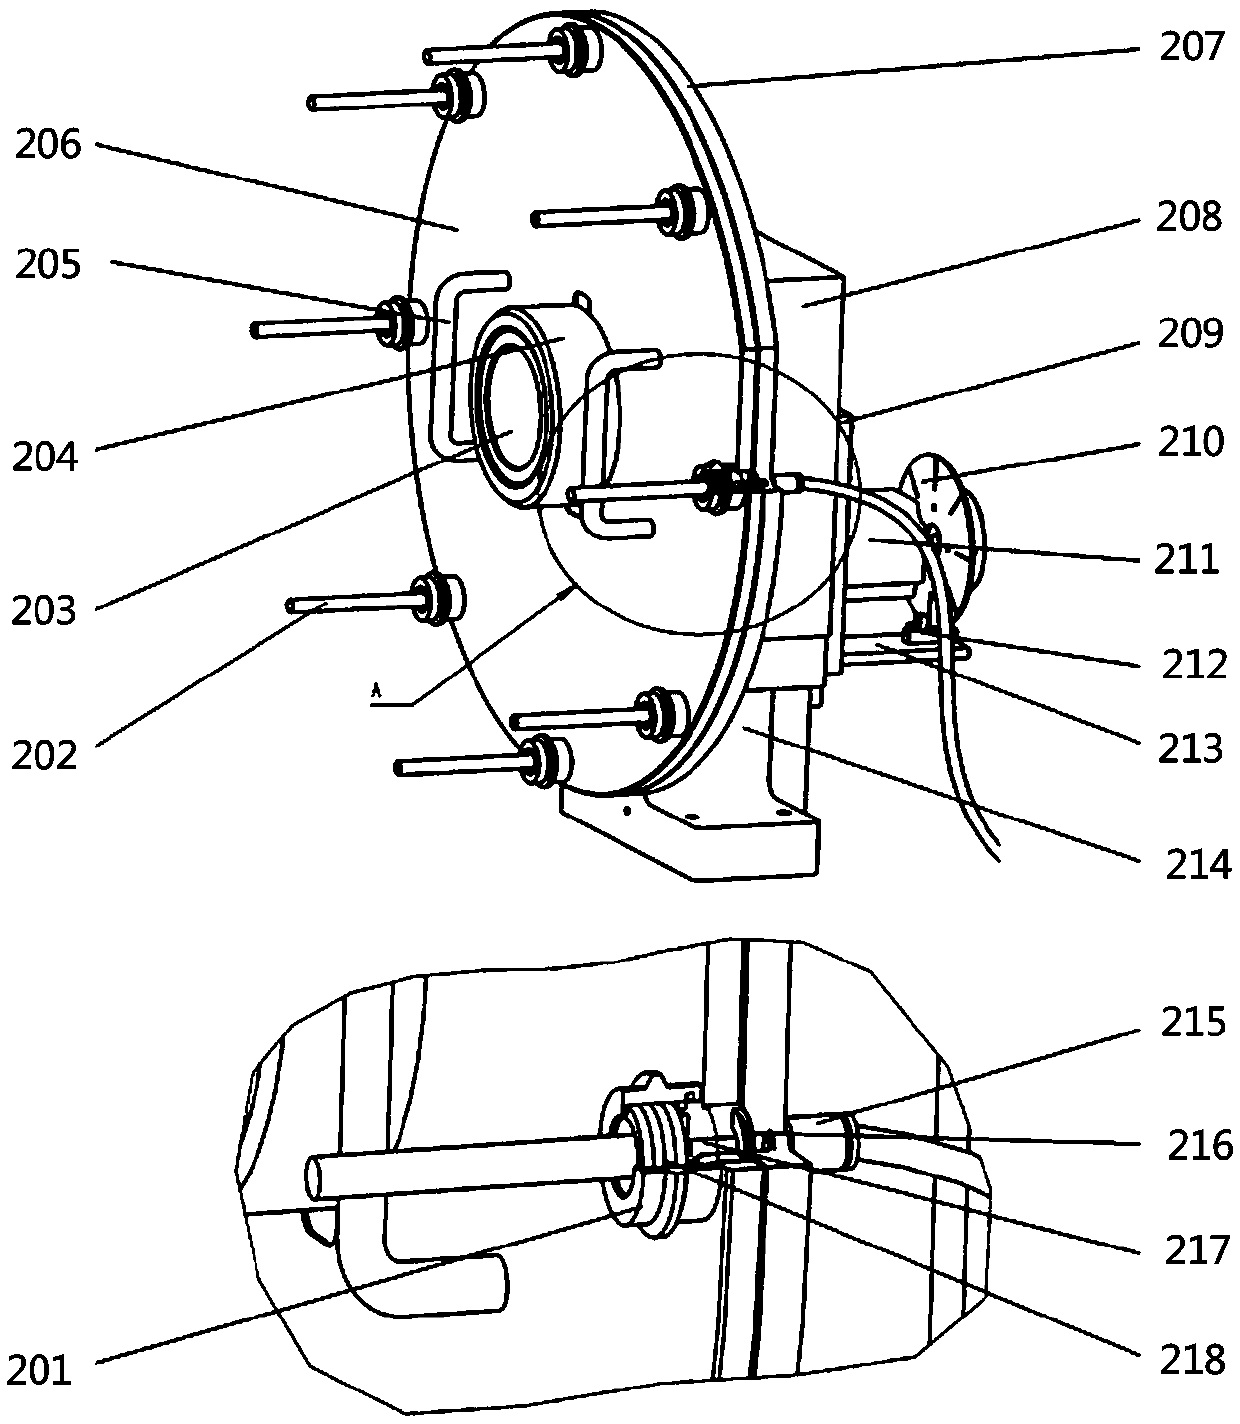 Rotating disc type cigarette inserting device for detecting cigarette ends